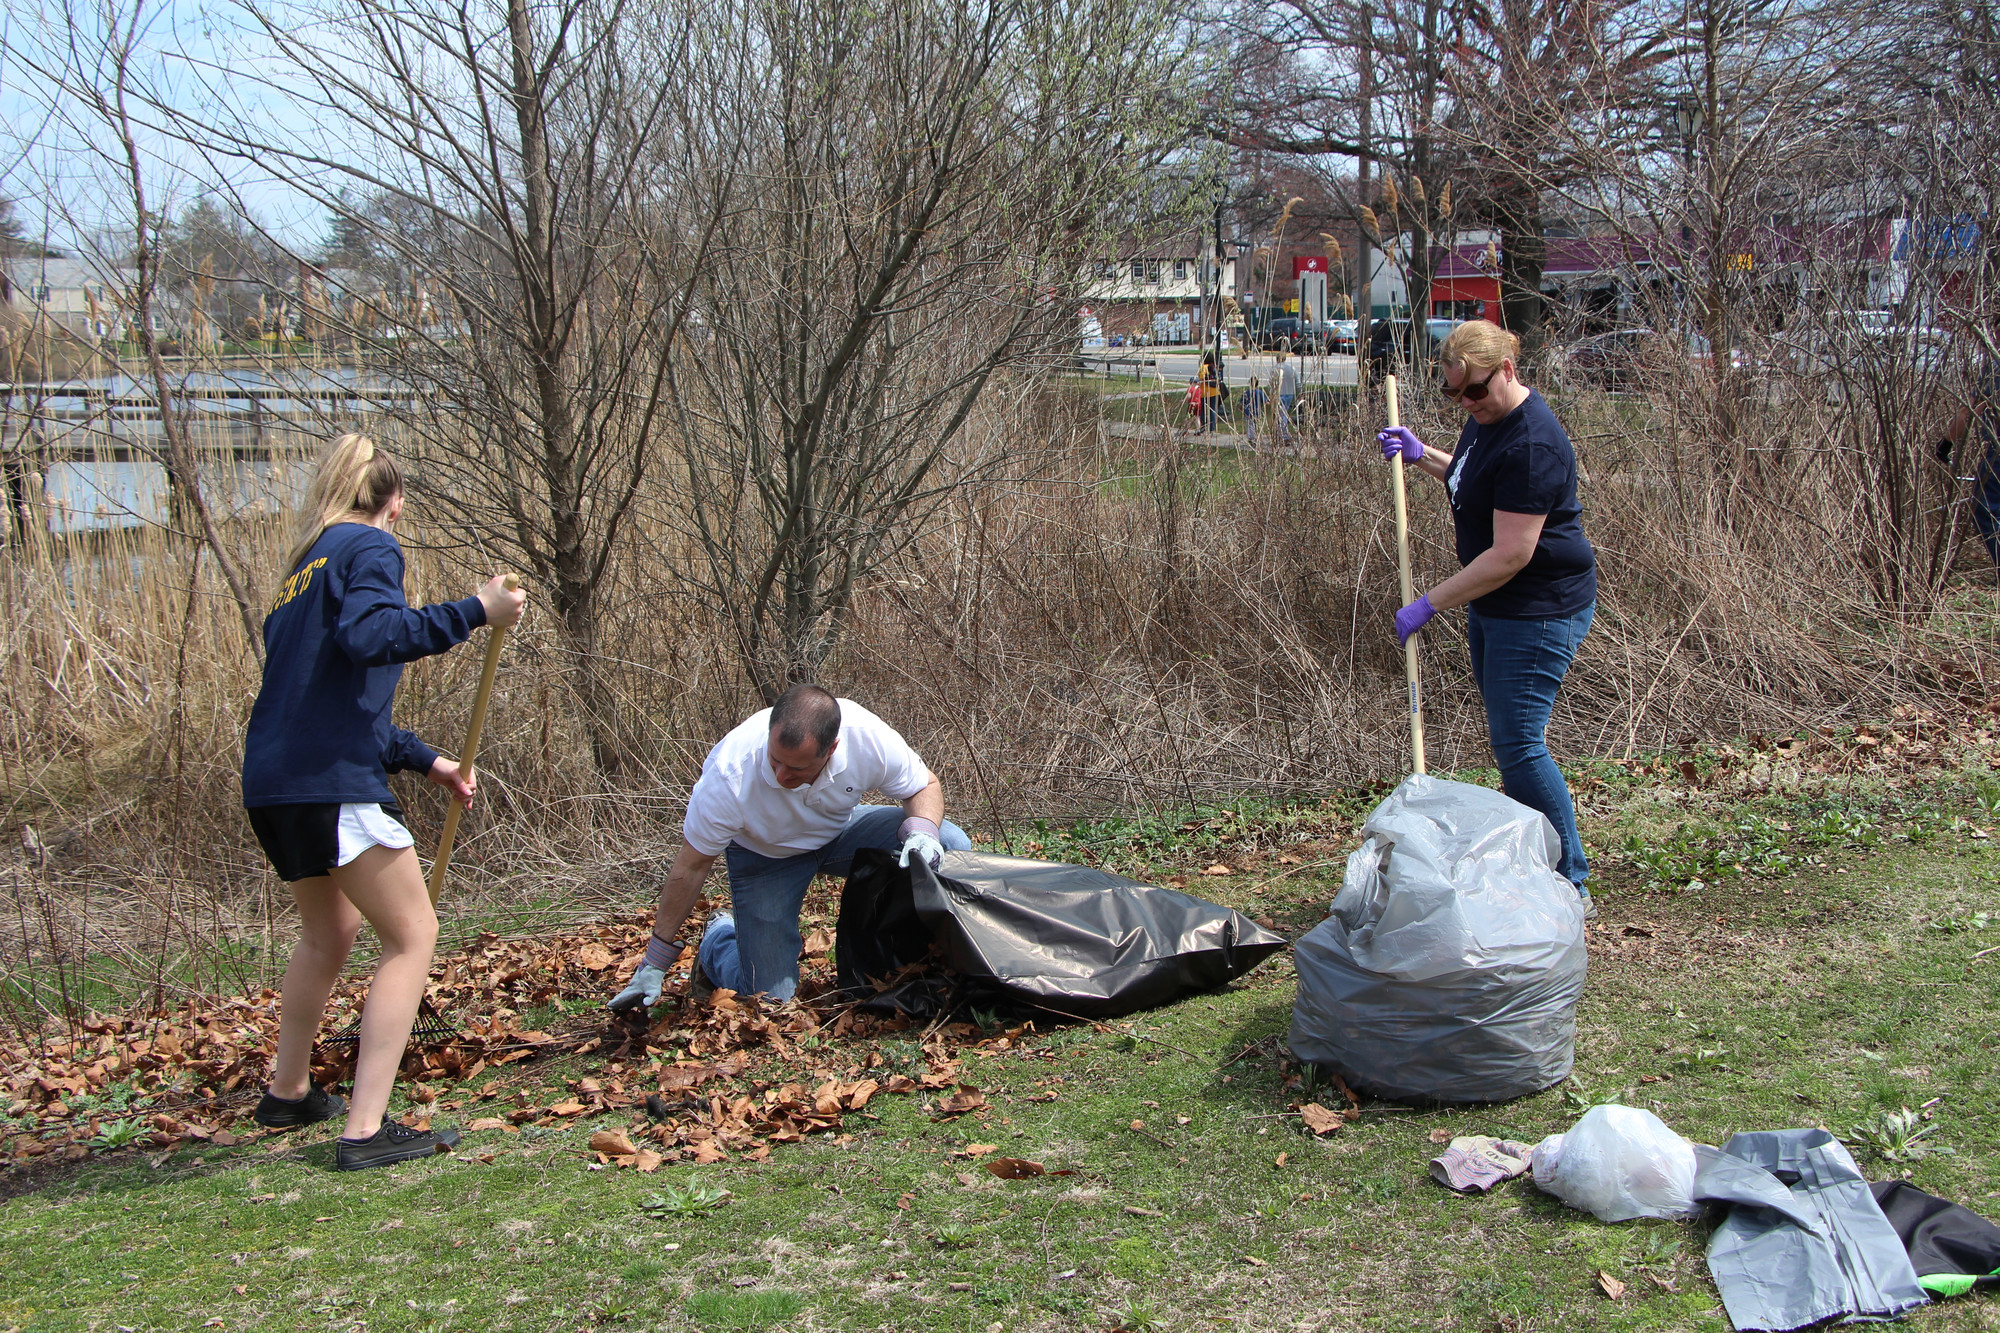 Many hands made light work at the cleanups over the weekend. Elizabeth Rattoballi, 16, left, and her mother Rosemary got some assistance from Assemblyman Brian Curran.